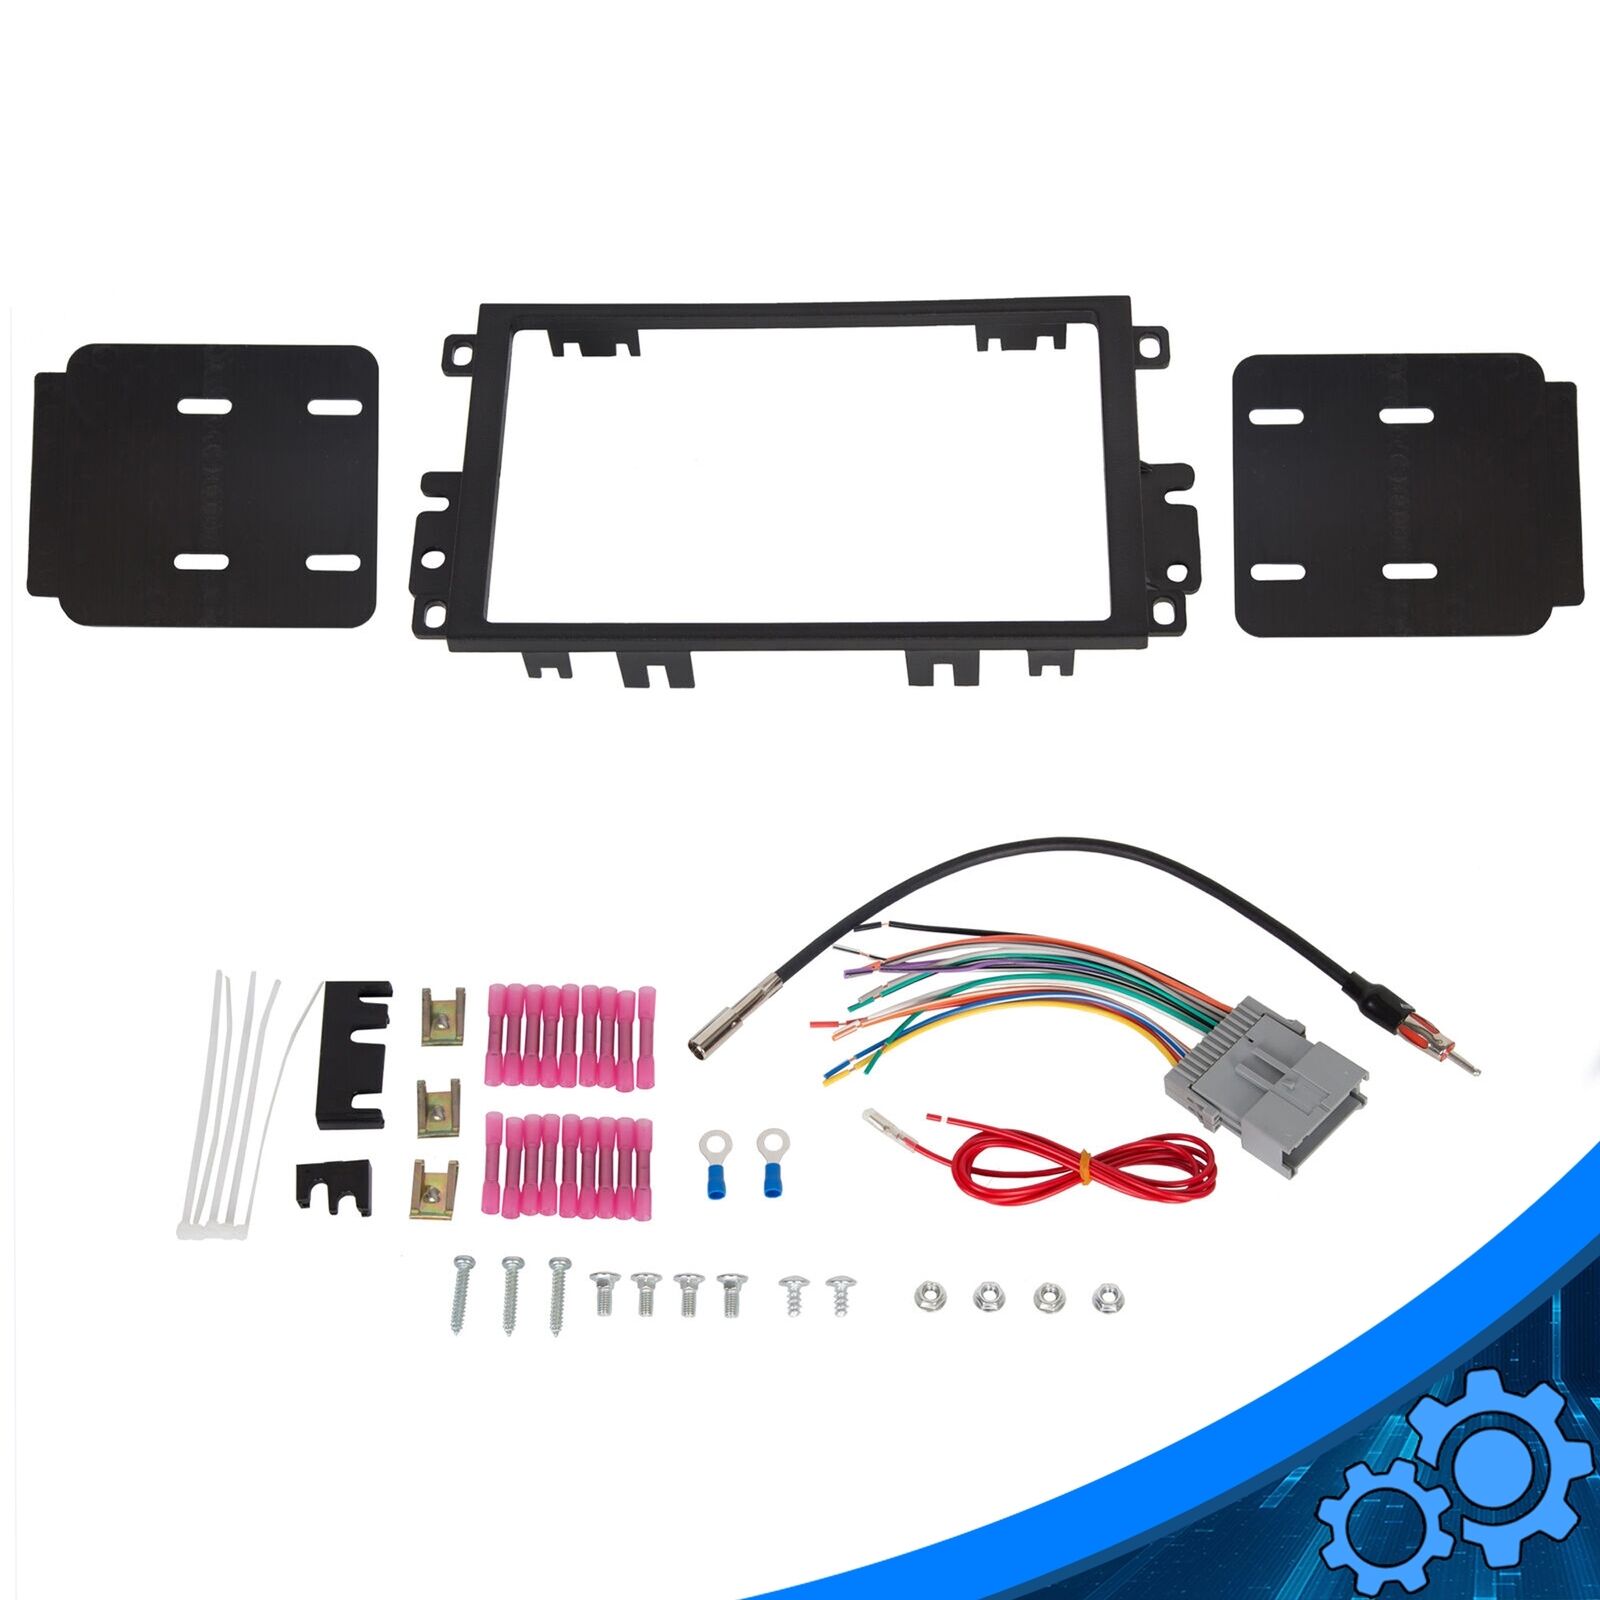 DOUBLE 2 DIN STEREO RADIO DASH KIT W/ WIRING HARNESS For BUICK CHEVY GMC Pontiac